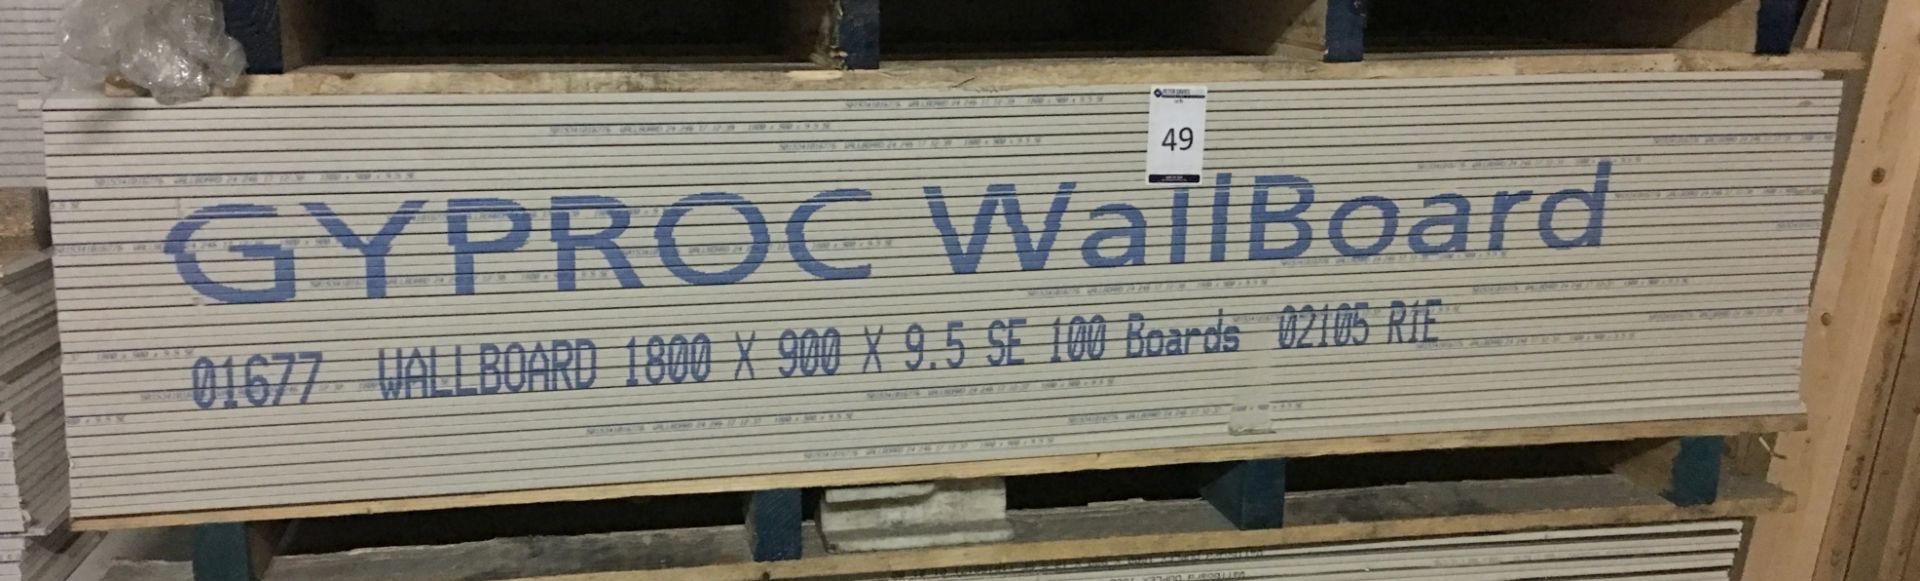 39 Sheets of GYPROC Wallboard Boards, 1800mm x 900mm x 9.5mm SE (located at Tooting, viewing Tuesday